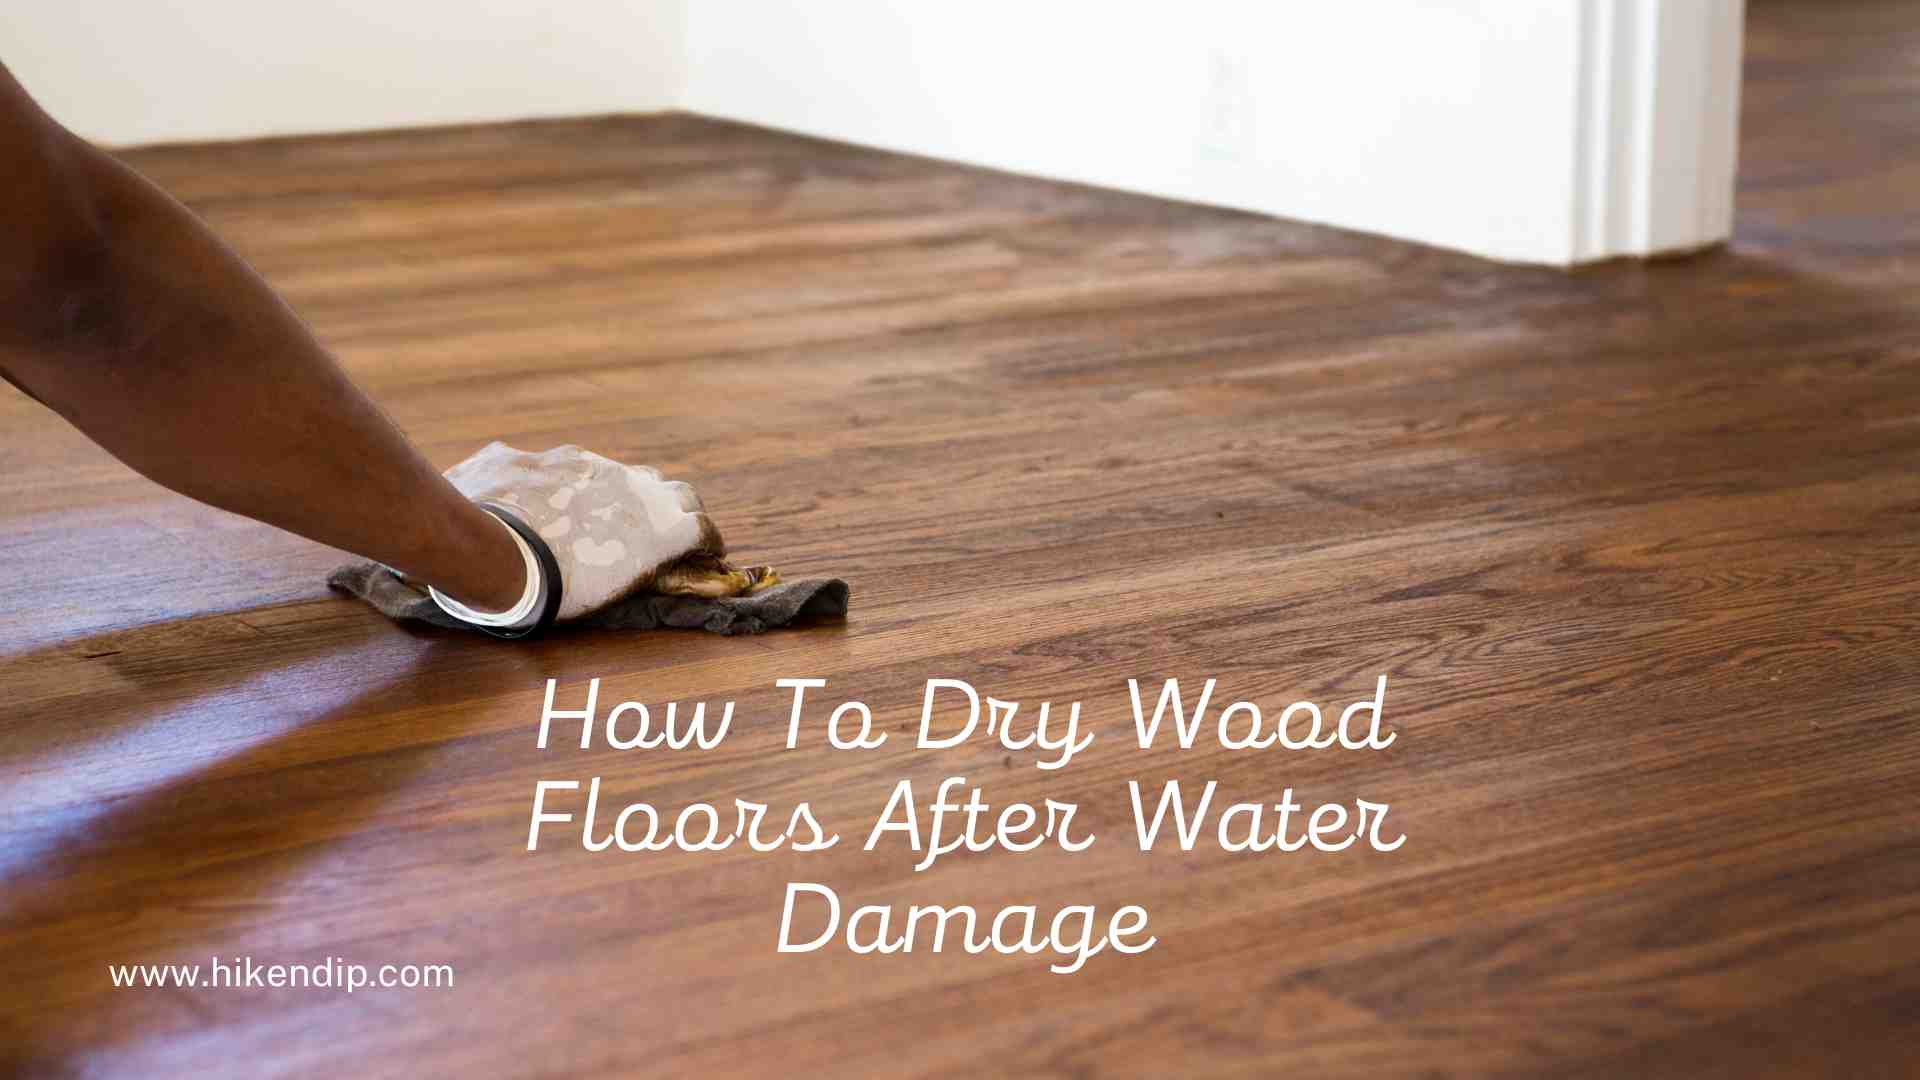 How To Dry Wood Floors After Water Damage